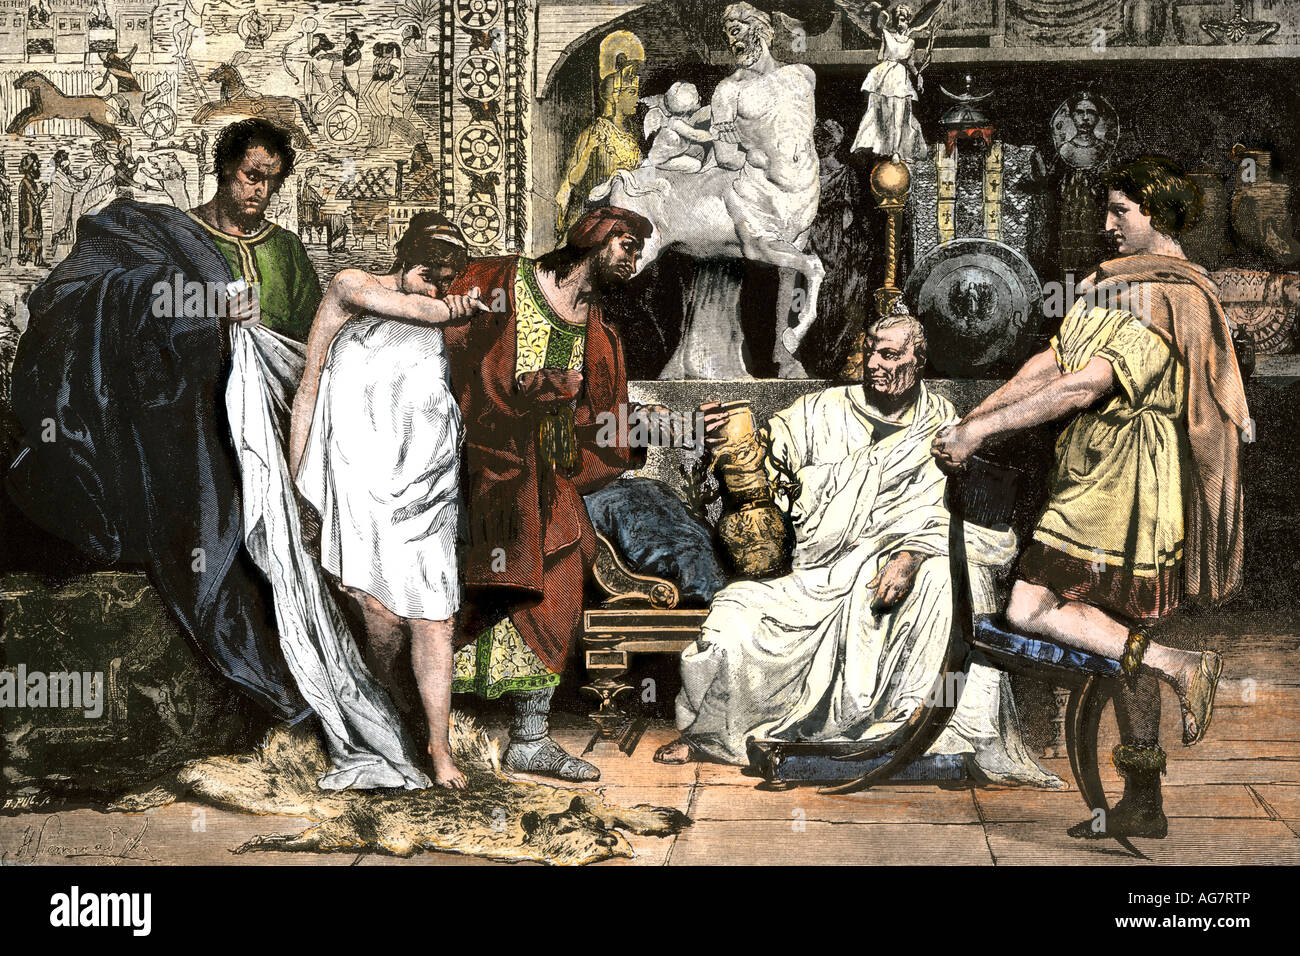 Merchants from Carthage selling slaves and wares in a Roman villa. Hand-colored woodcut Stock Photo